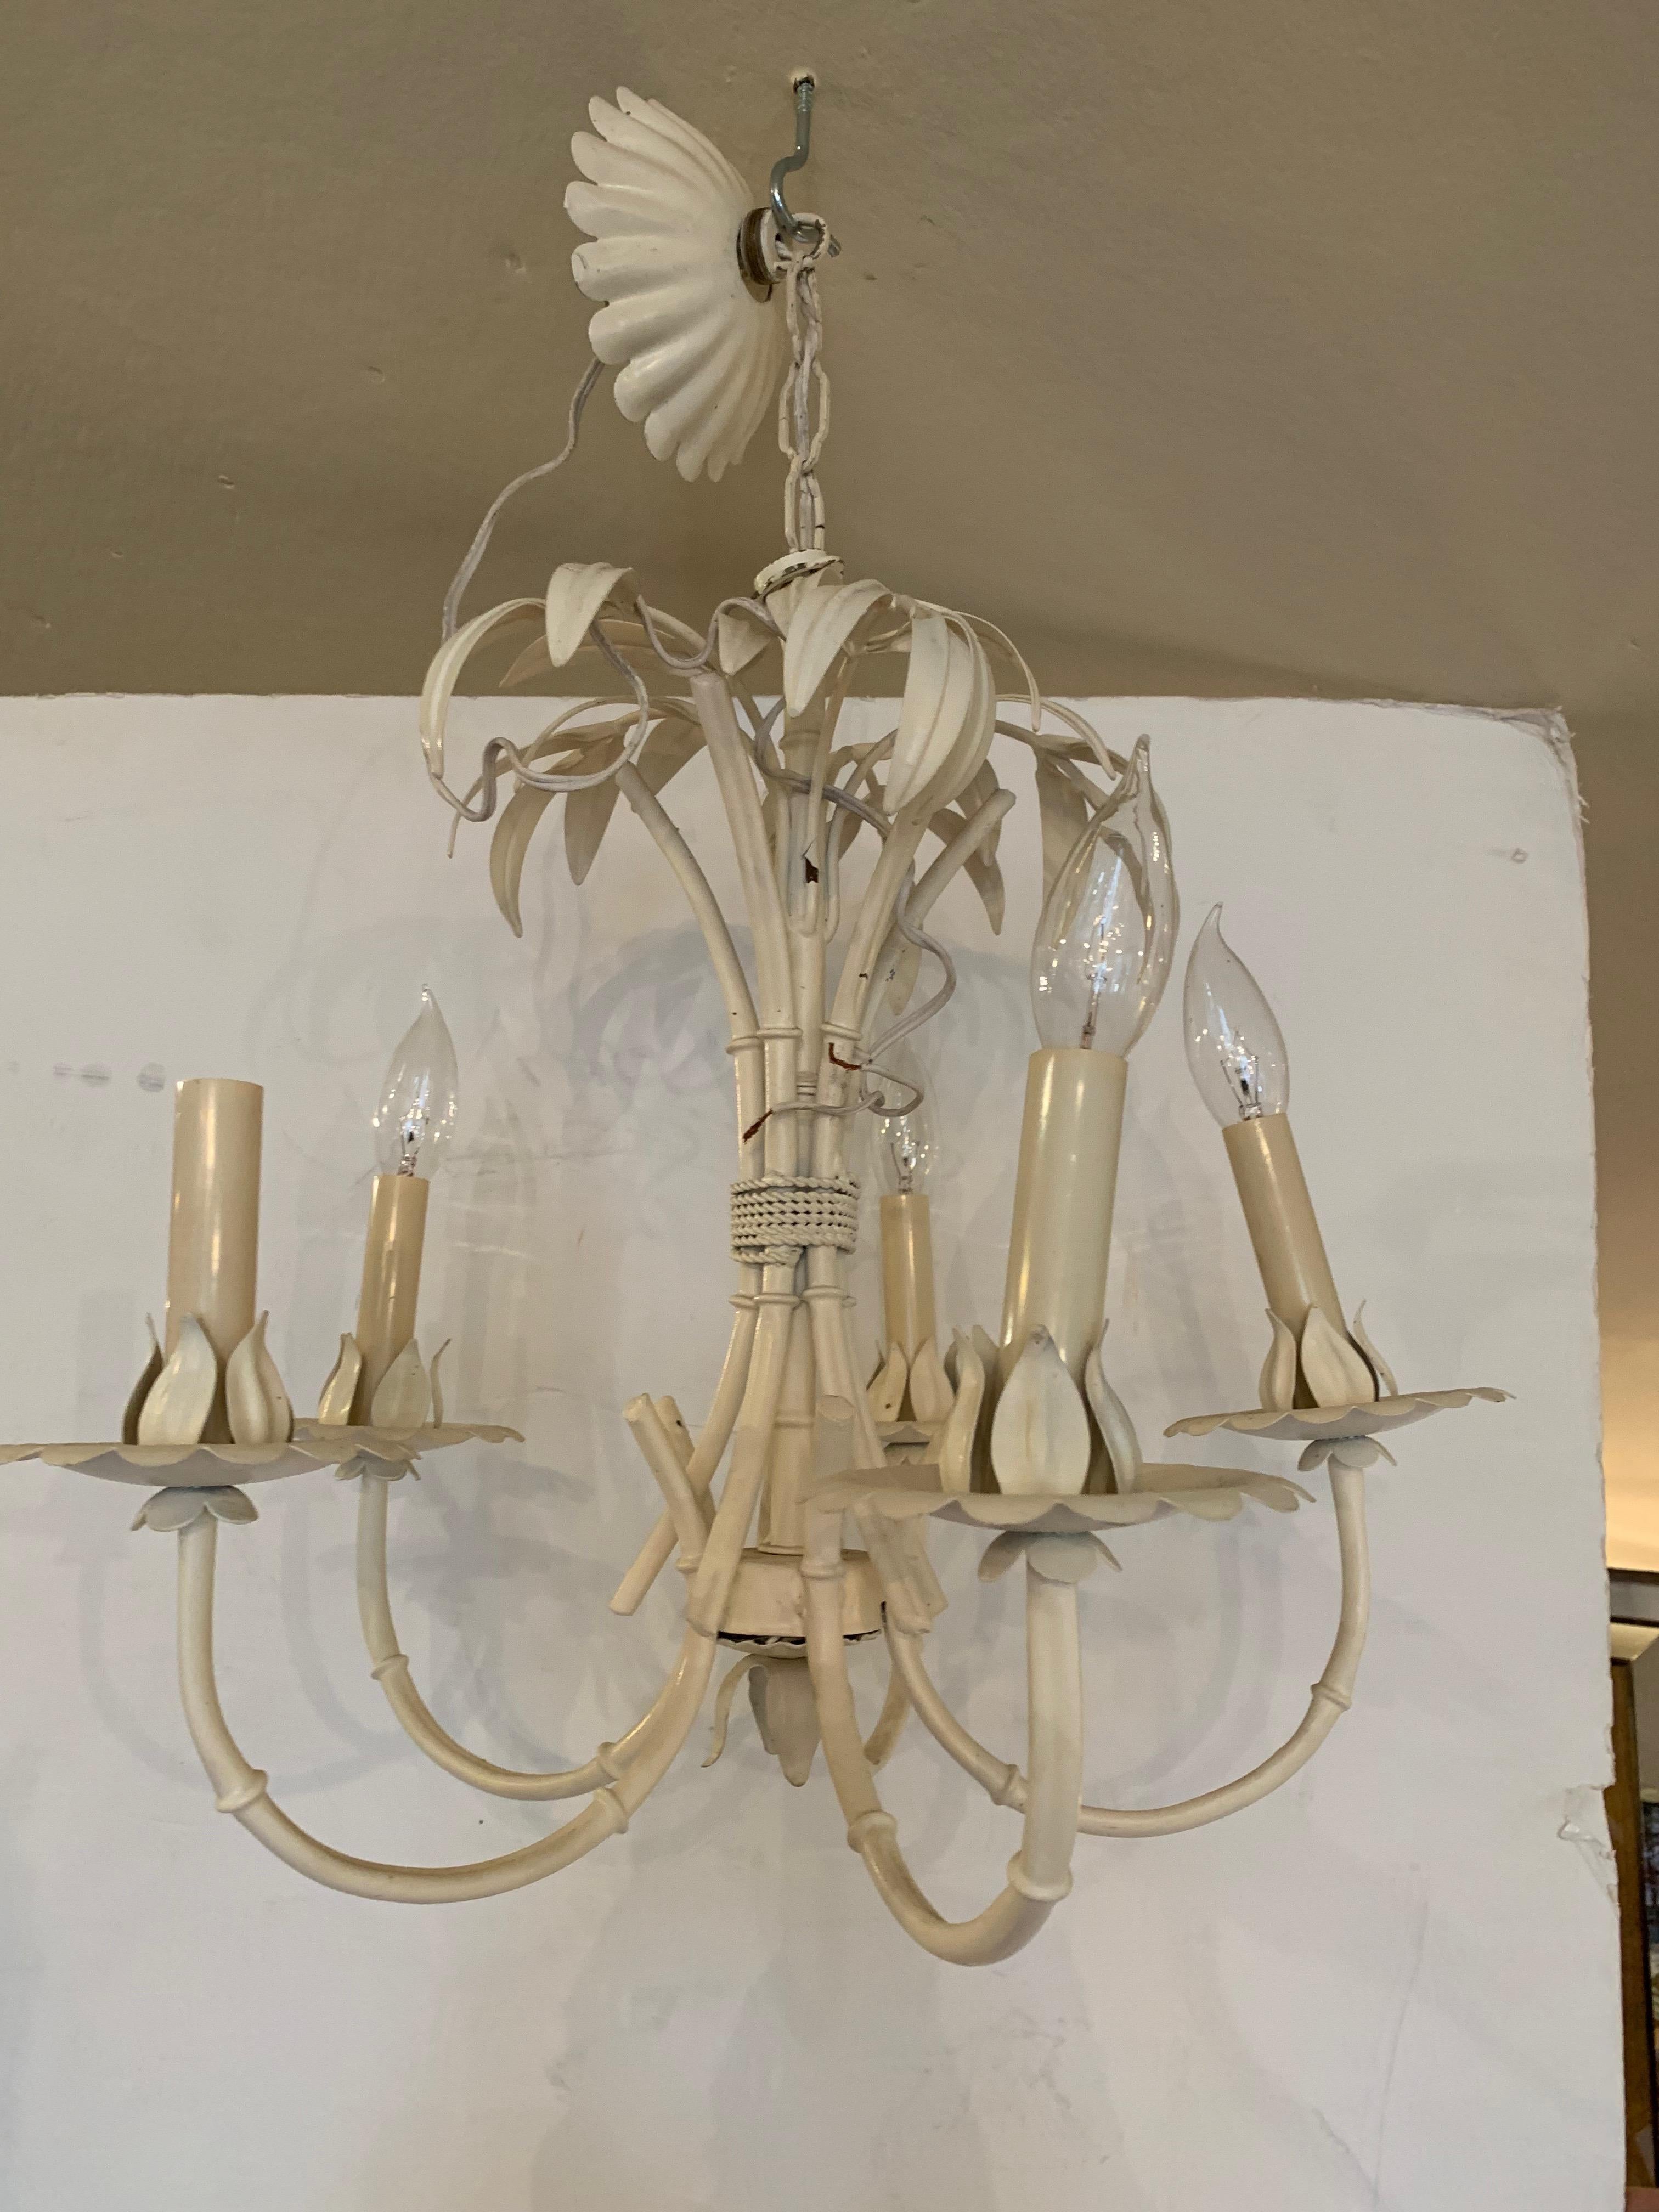 American Vintage Hollywood Regency White Painted Faux Bamboo Iron and Tole Chandelier